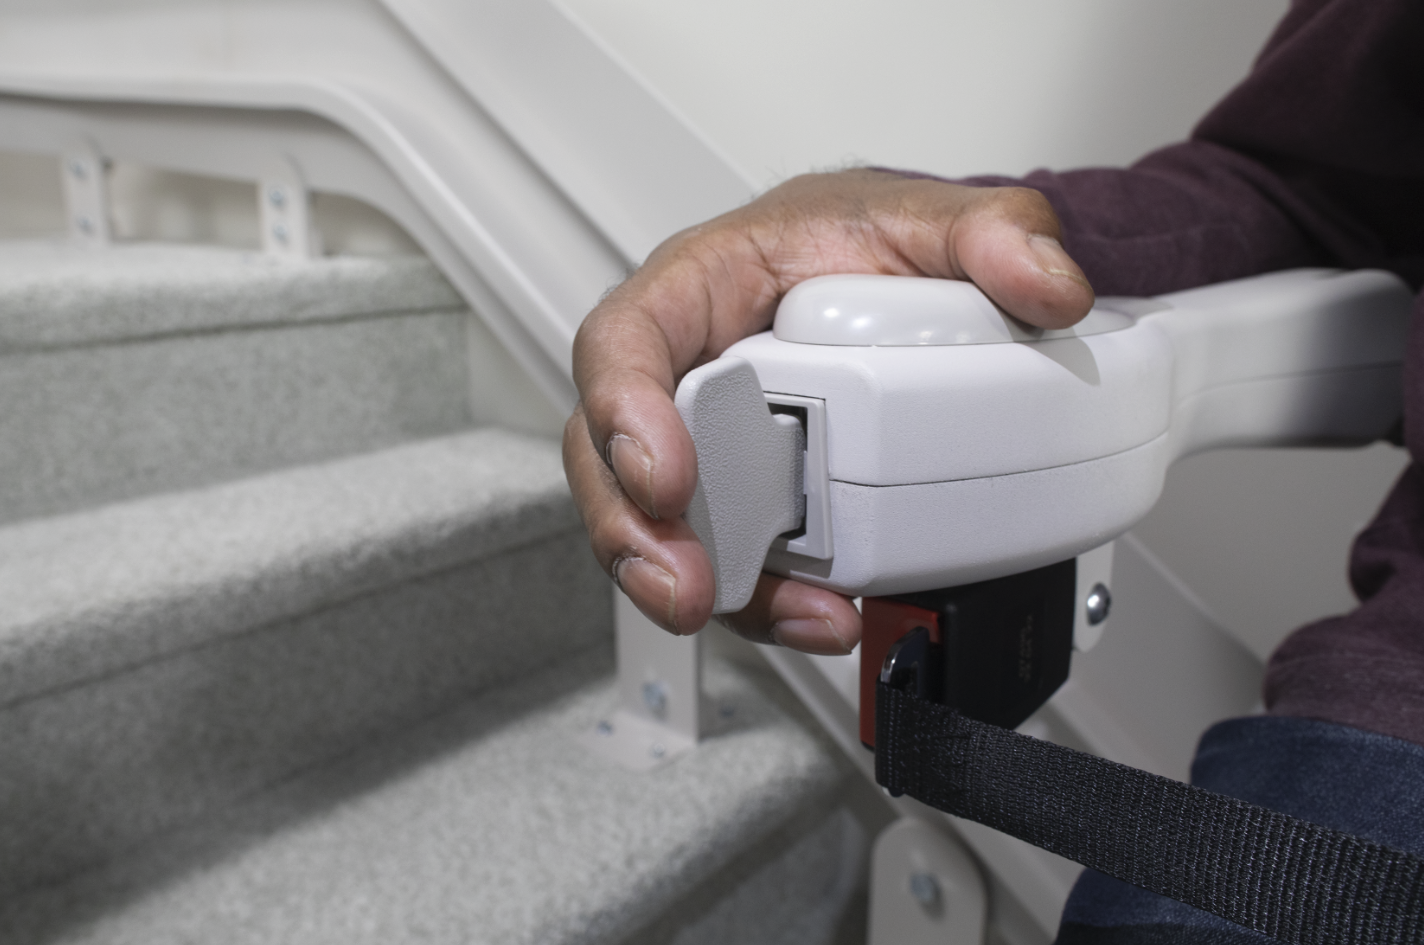 Bruno curved indoor stairlift controls